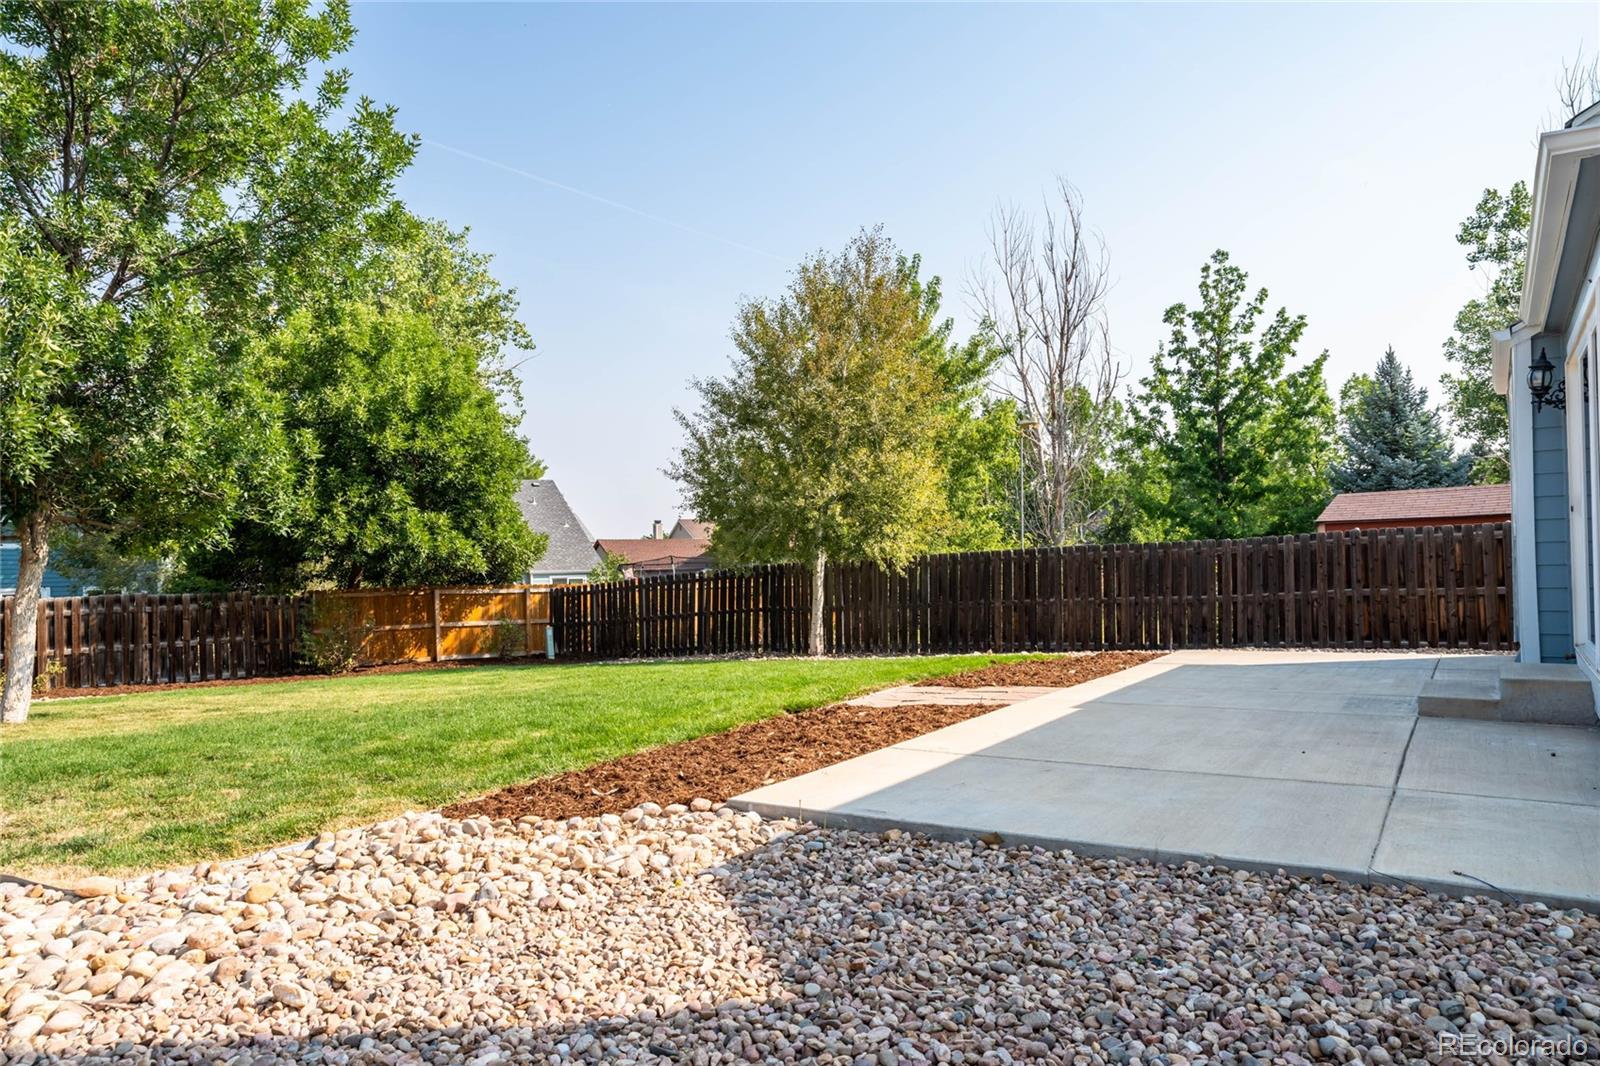 11329 103rd, Westminster, CO